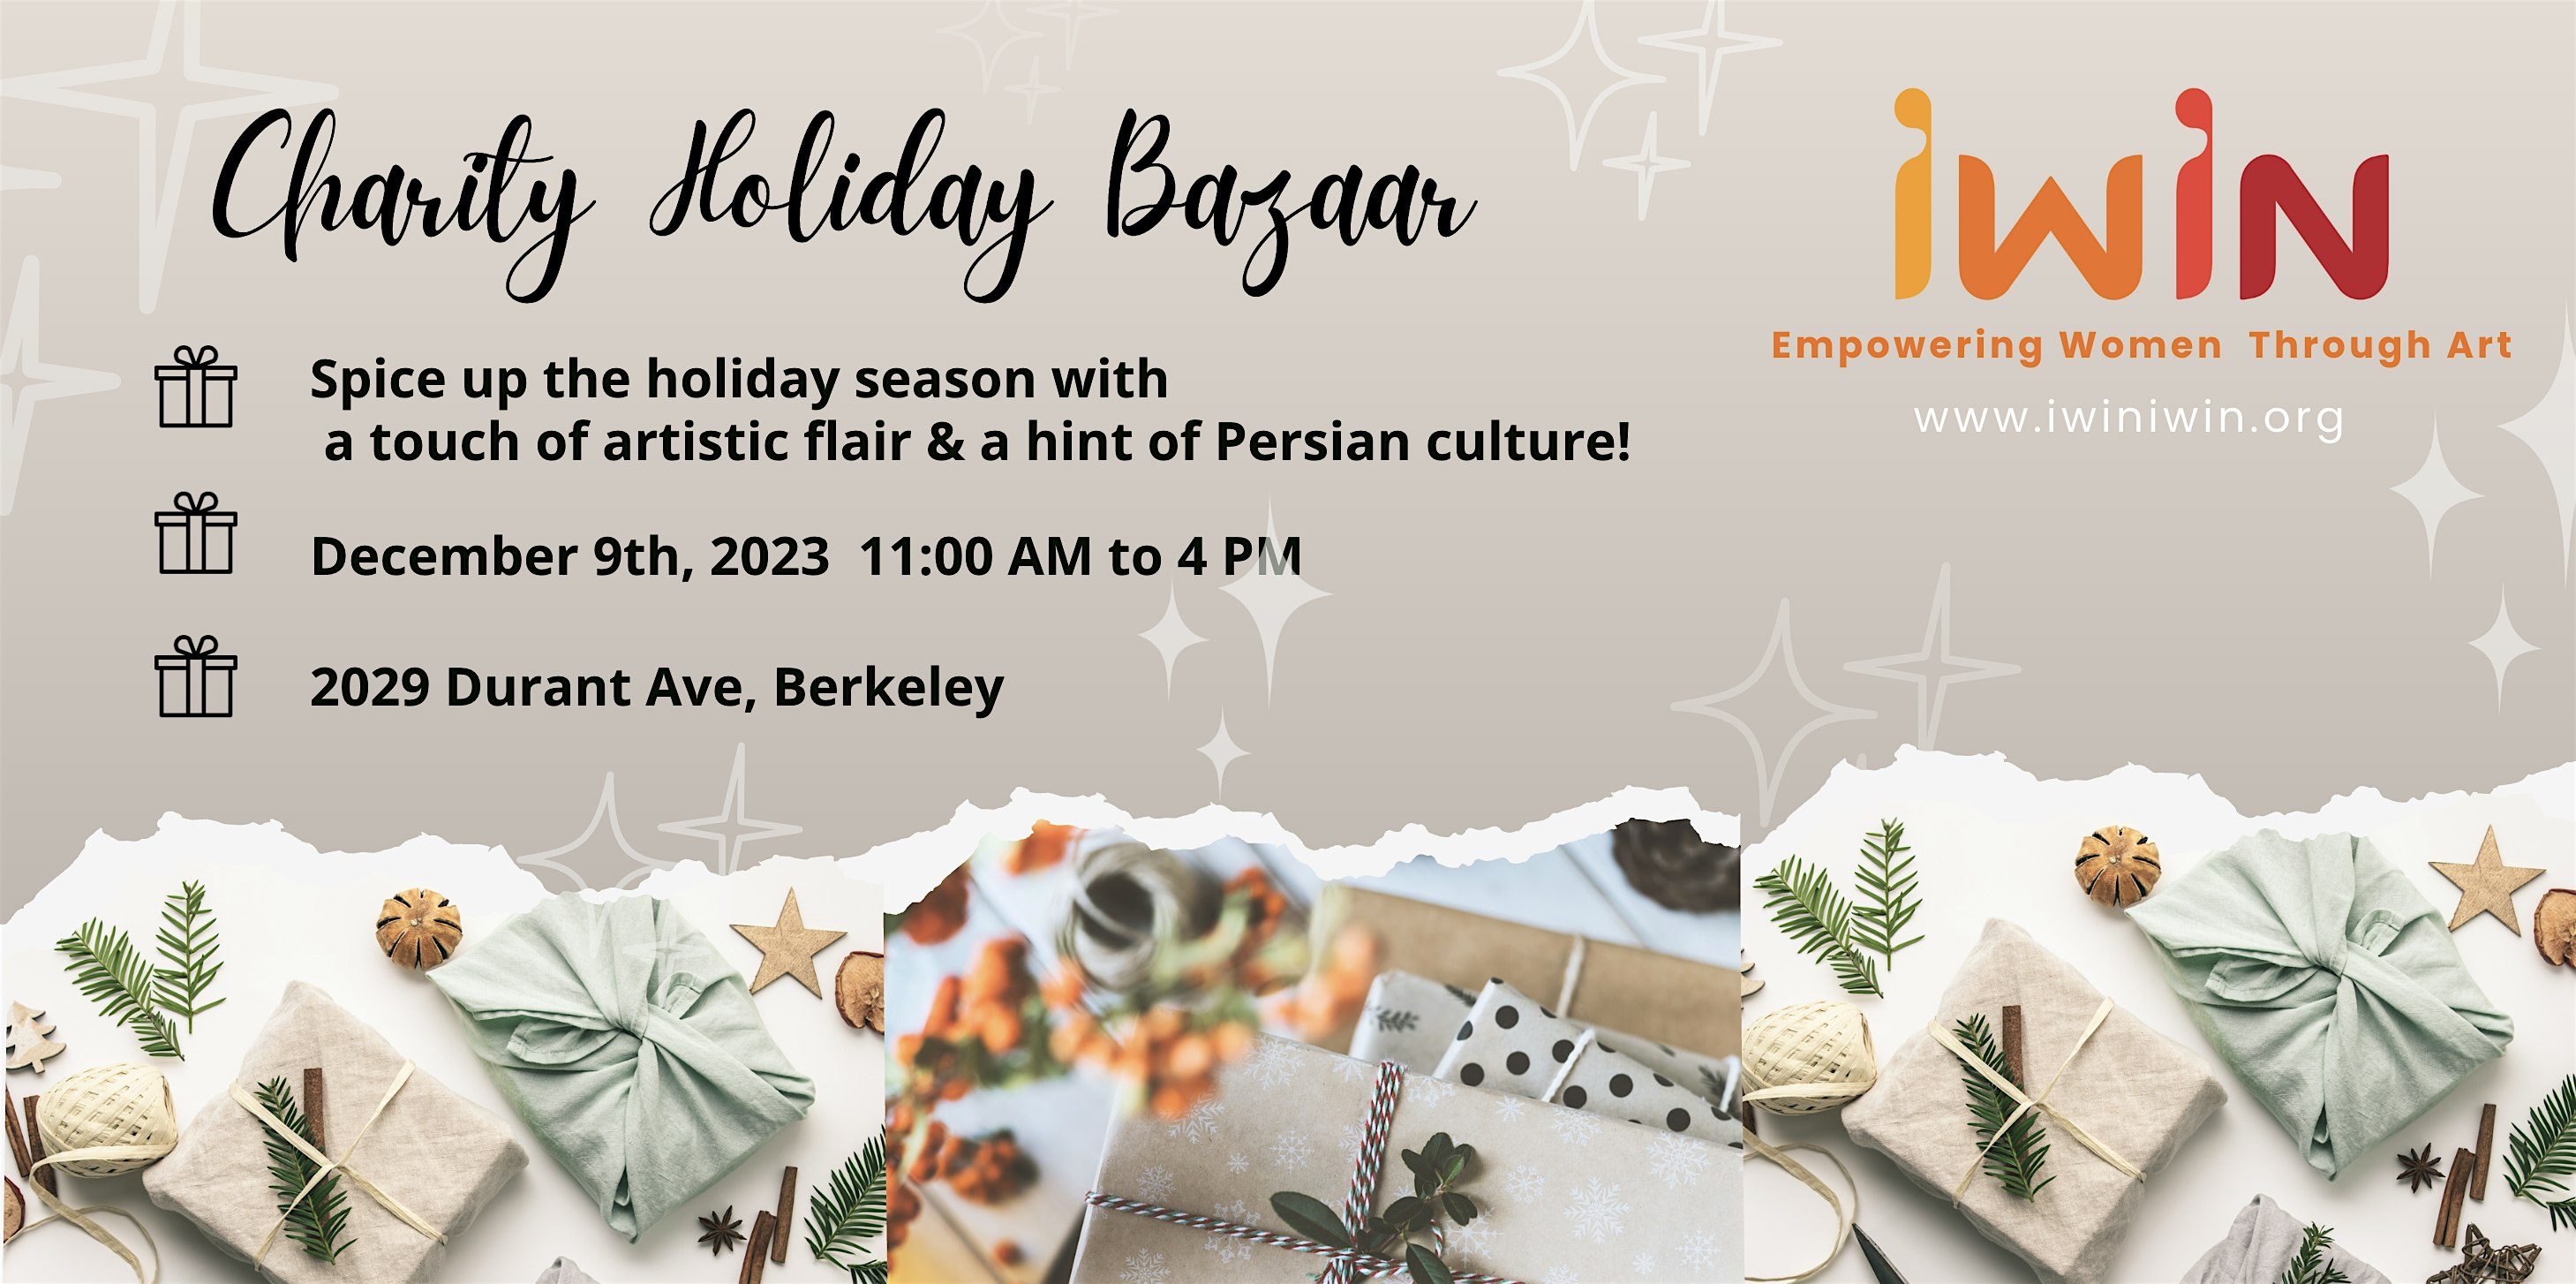 Holiday Bazaar with the mission of  Empowering  Women Through Art